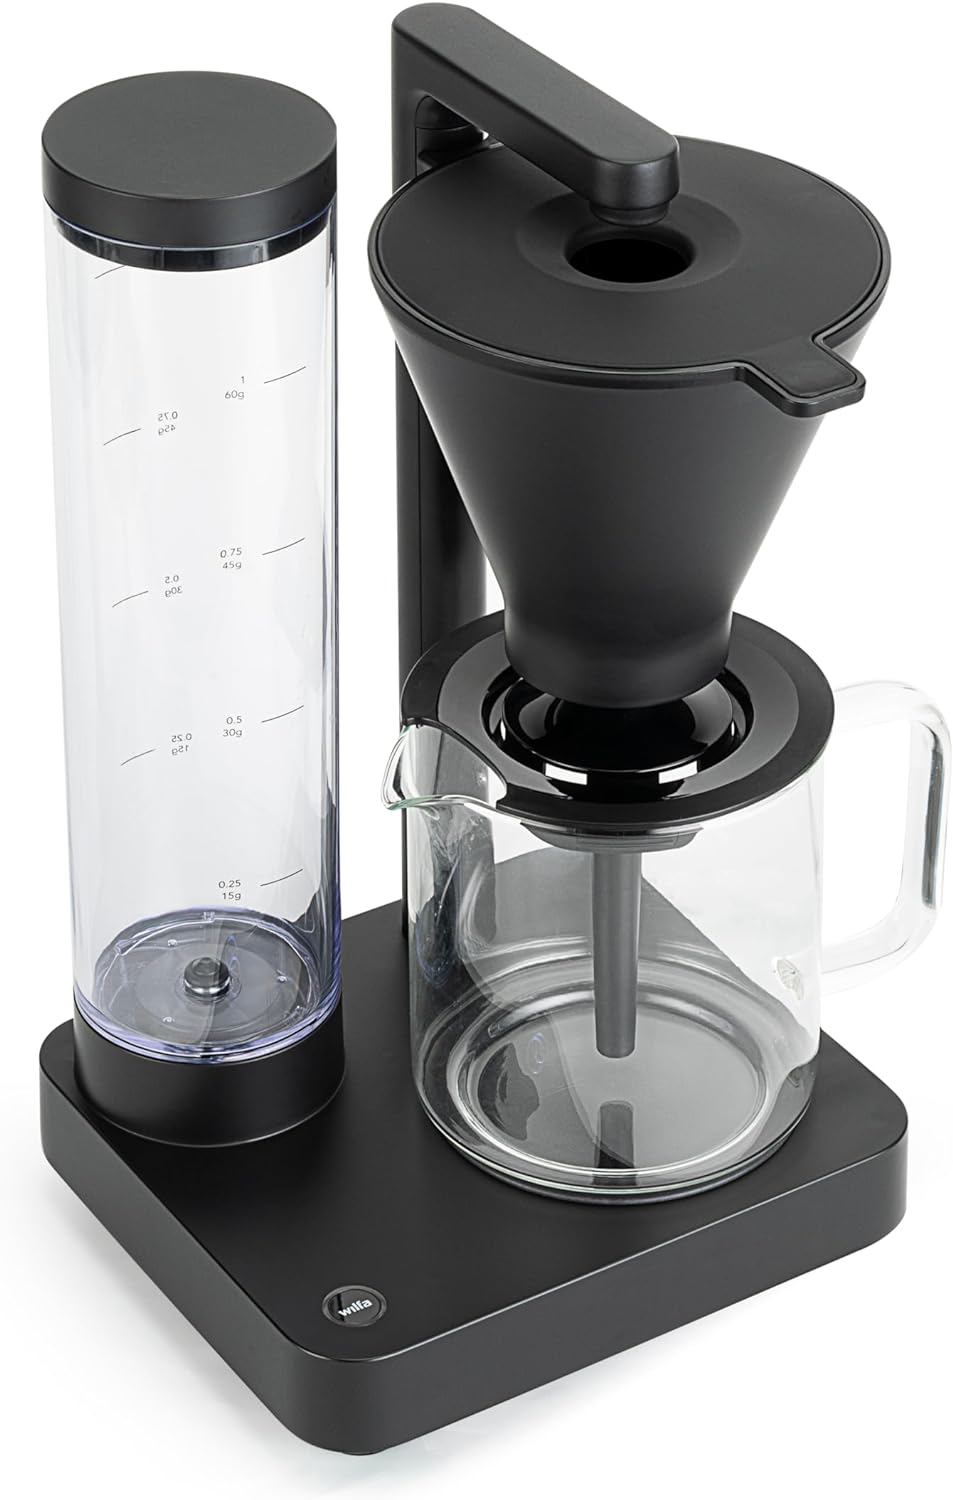 Wilfa Performance Compact Filter Coffee Machine - 1600 W - 1L Water Tank - Double-Walled Filter Holder - Adjustable Flow Speed - Keep Warm Function - Drip Stop & Auto Shut-Off (Black)